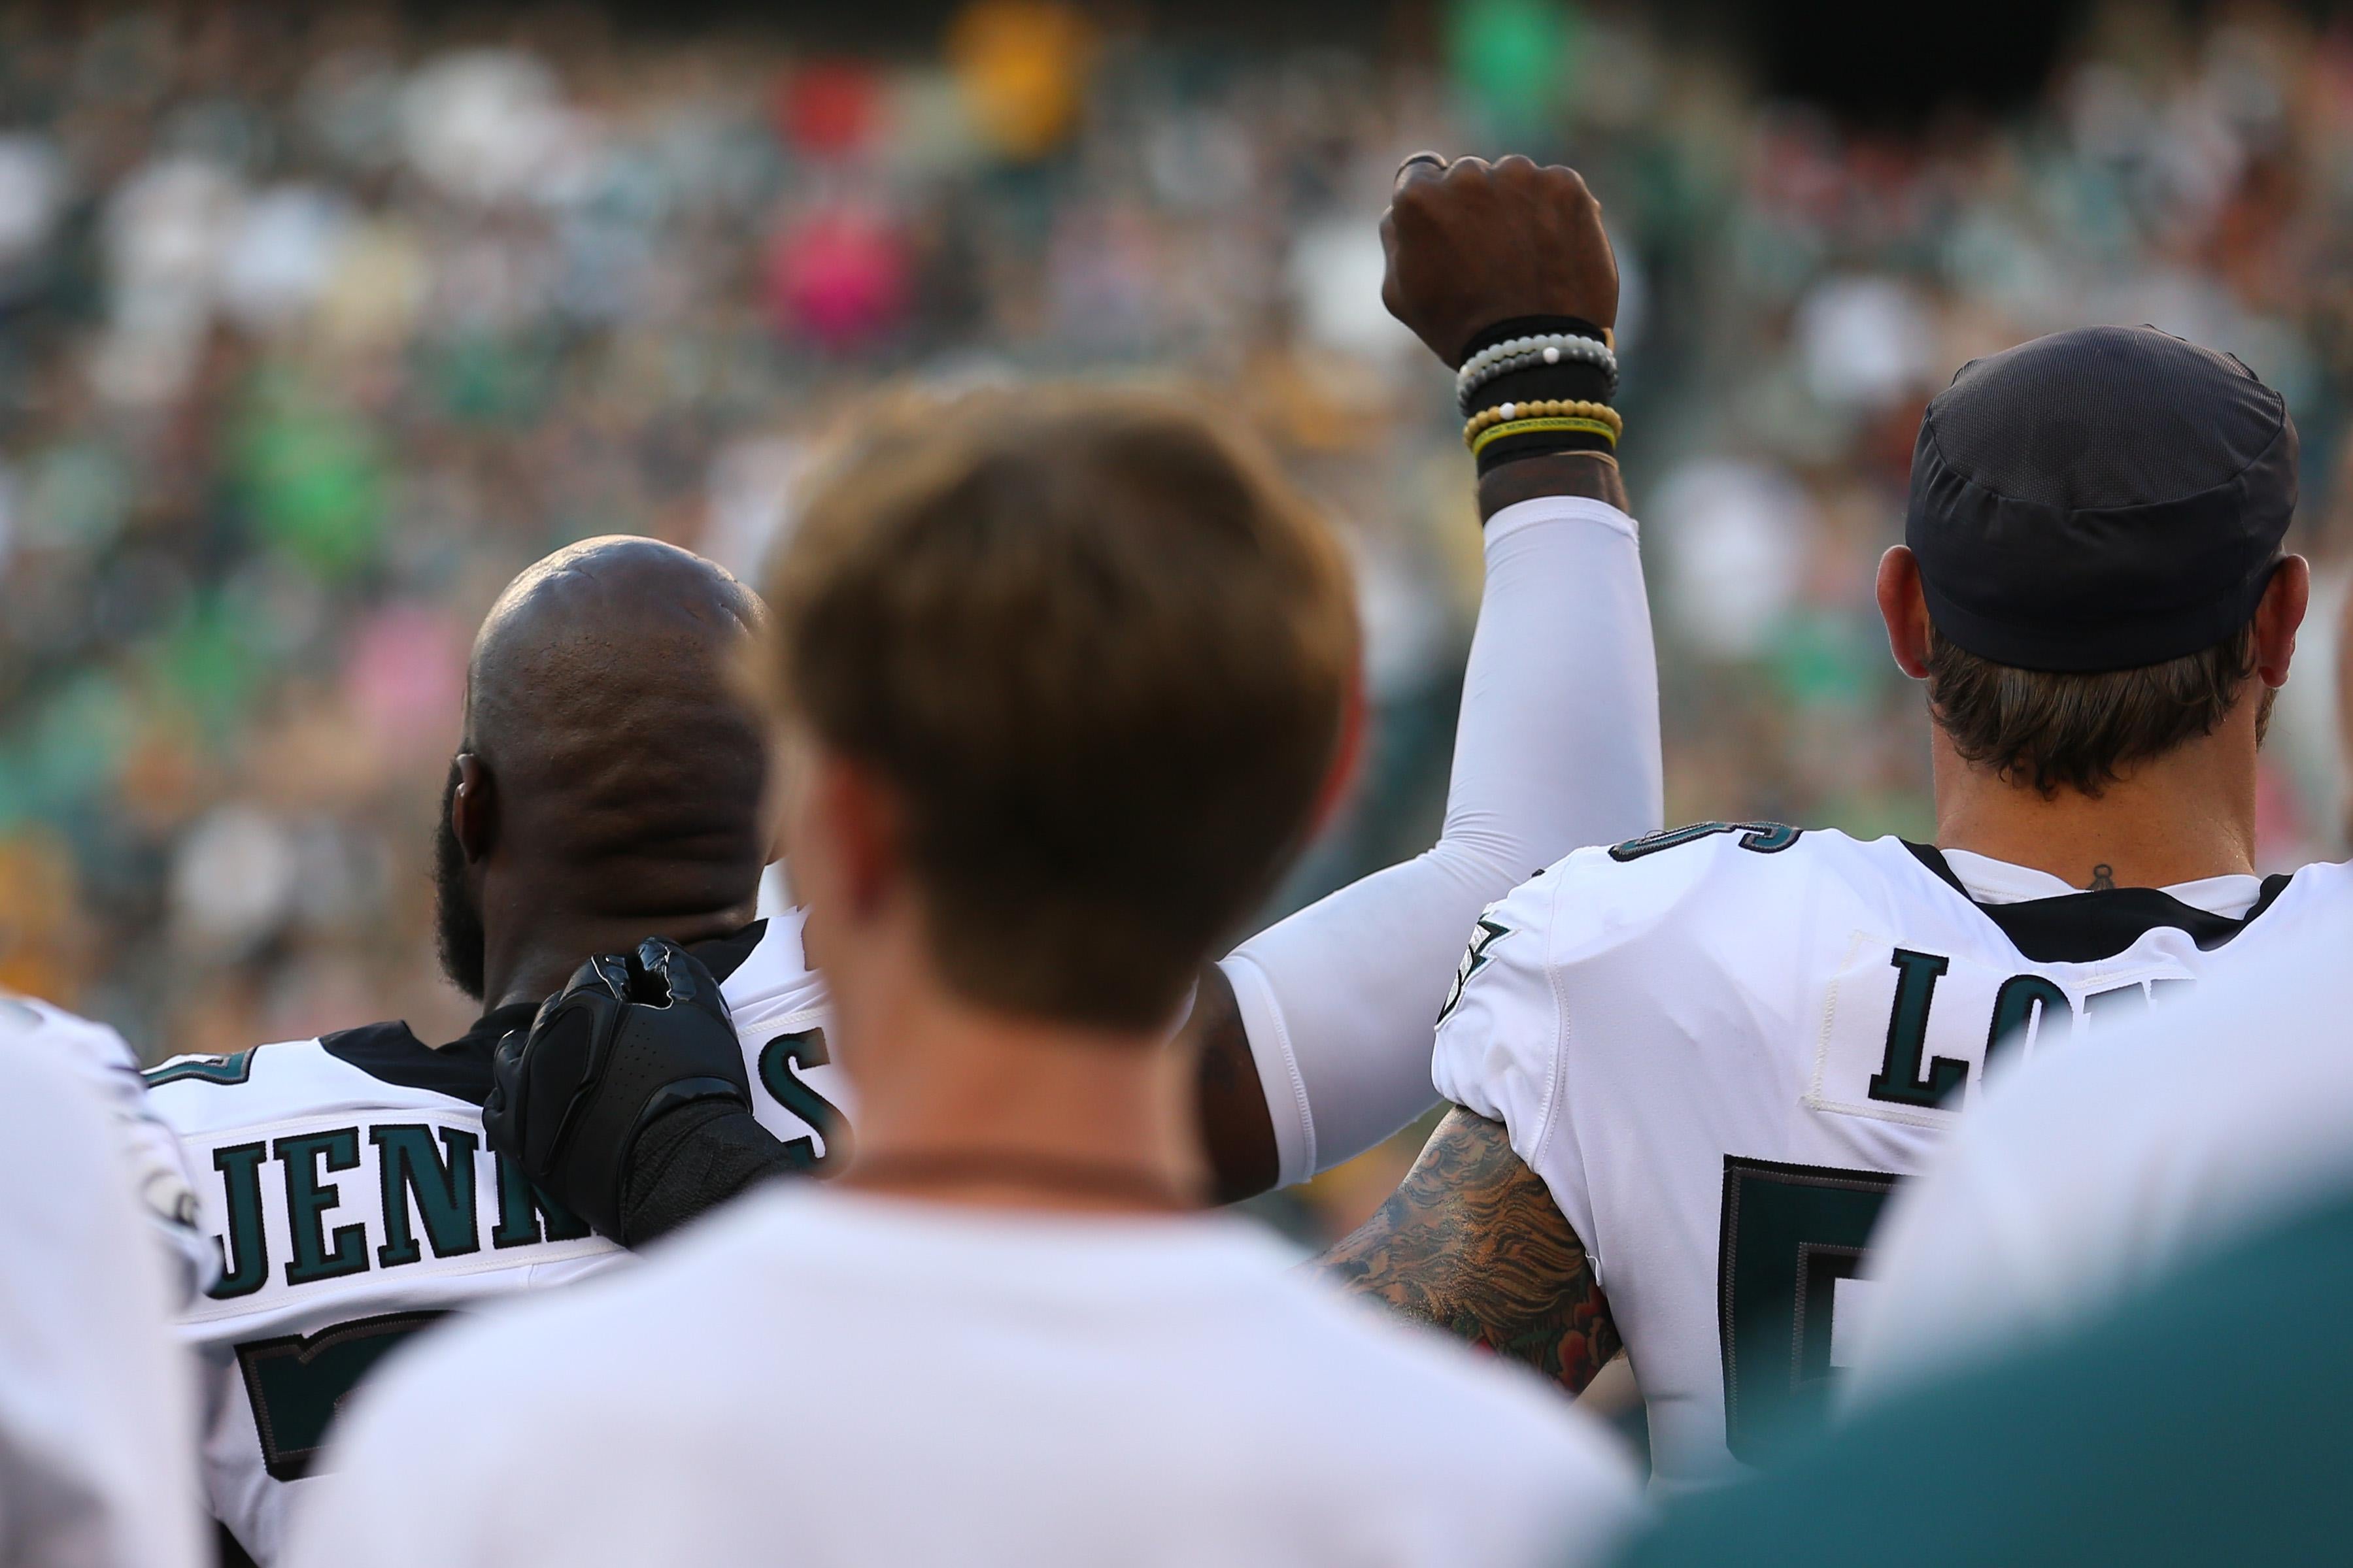 Malcolm Jenkins #27 of the Philadelphia Eagles raises his fist during the national anthem as Chris Long #56 puts his arm around him